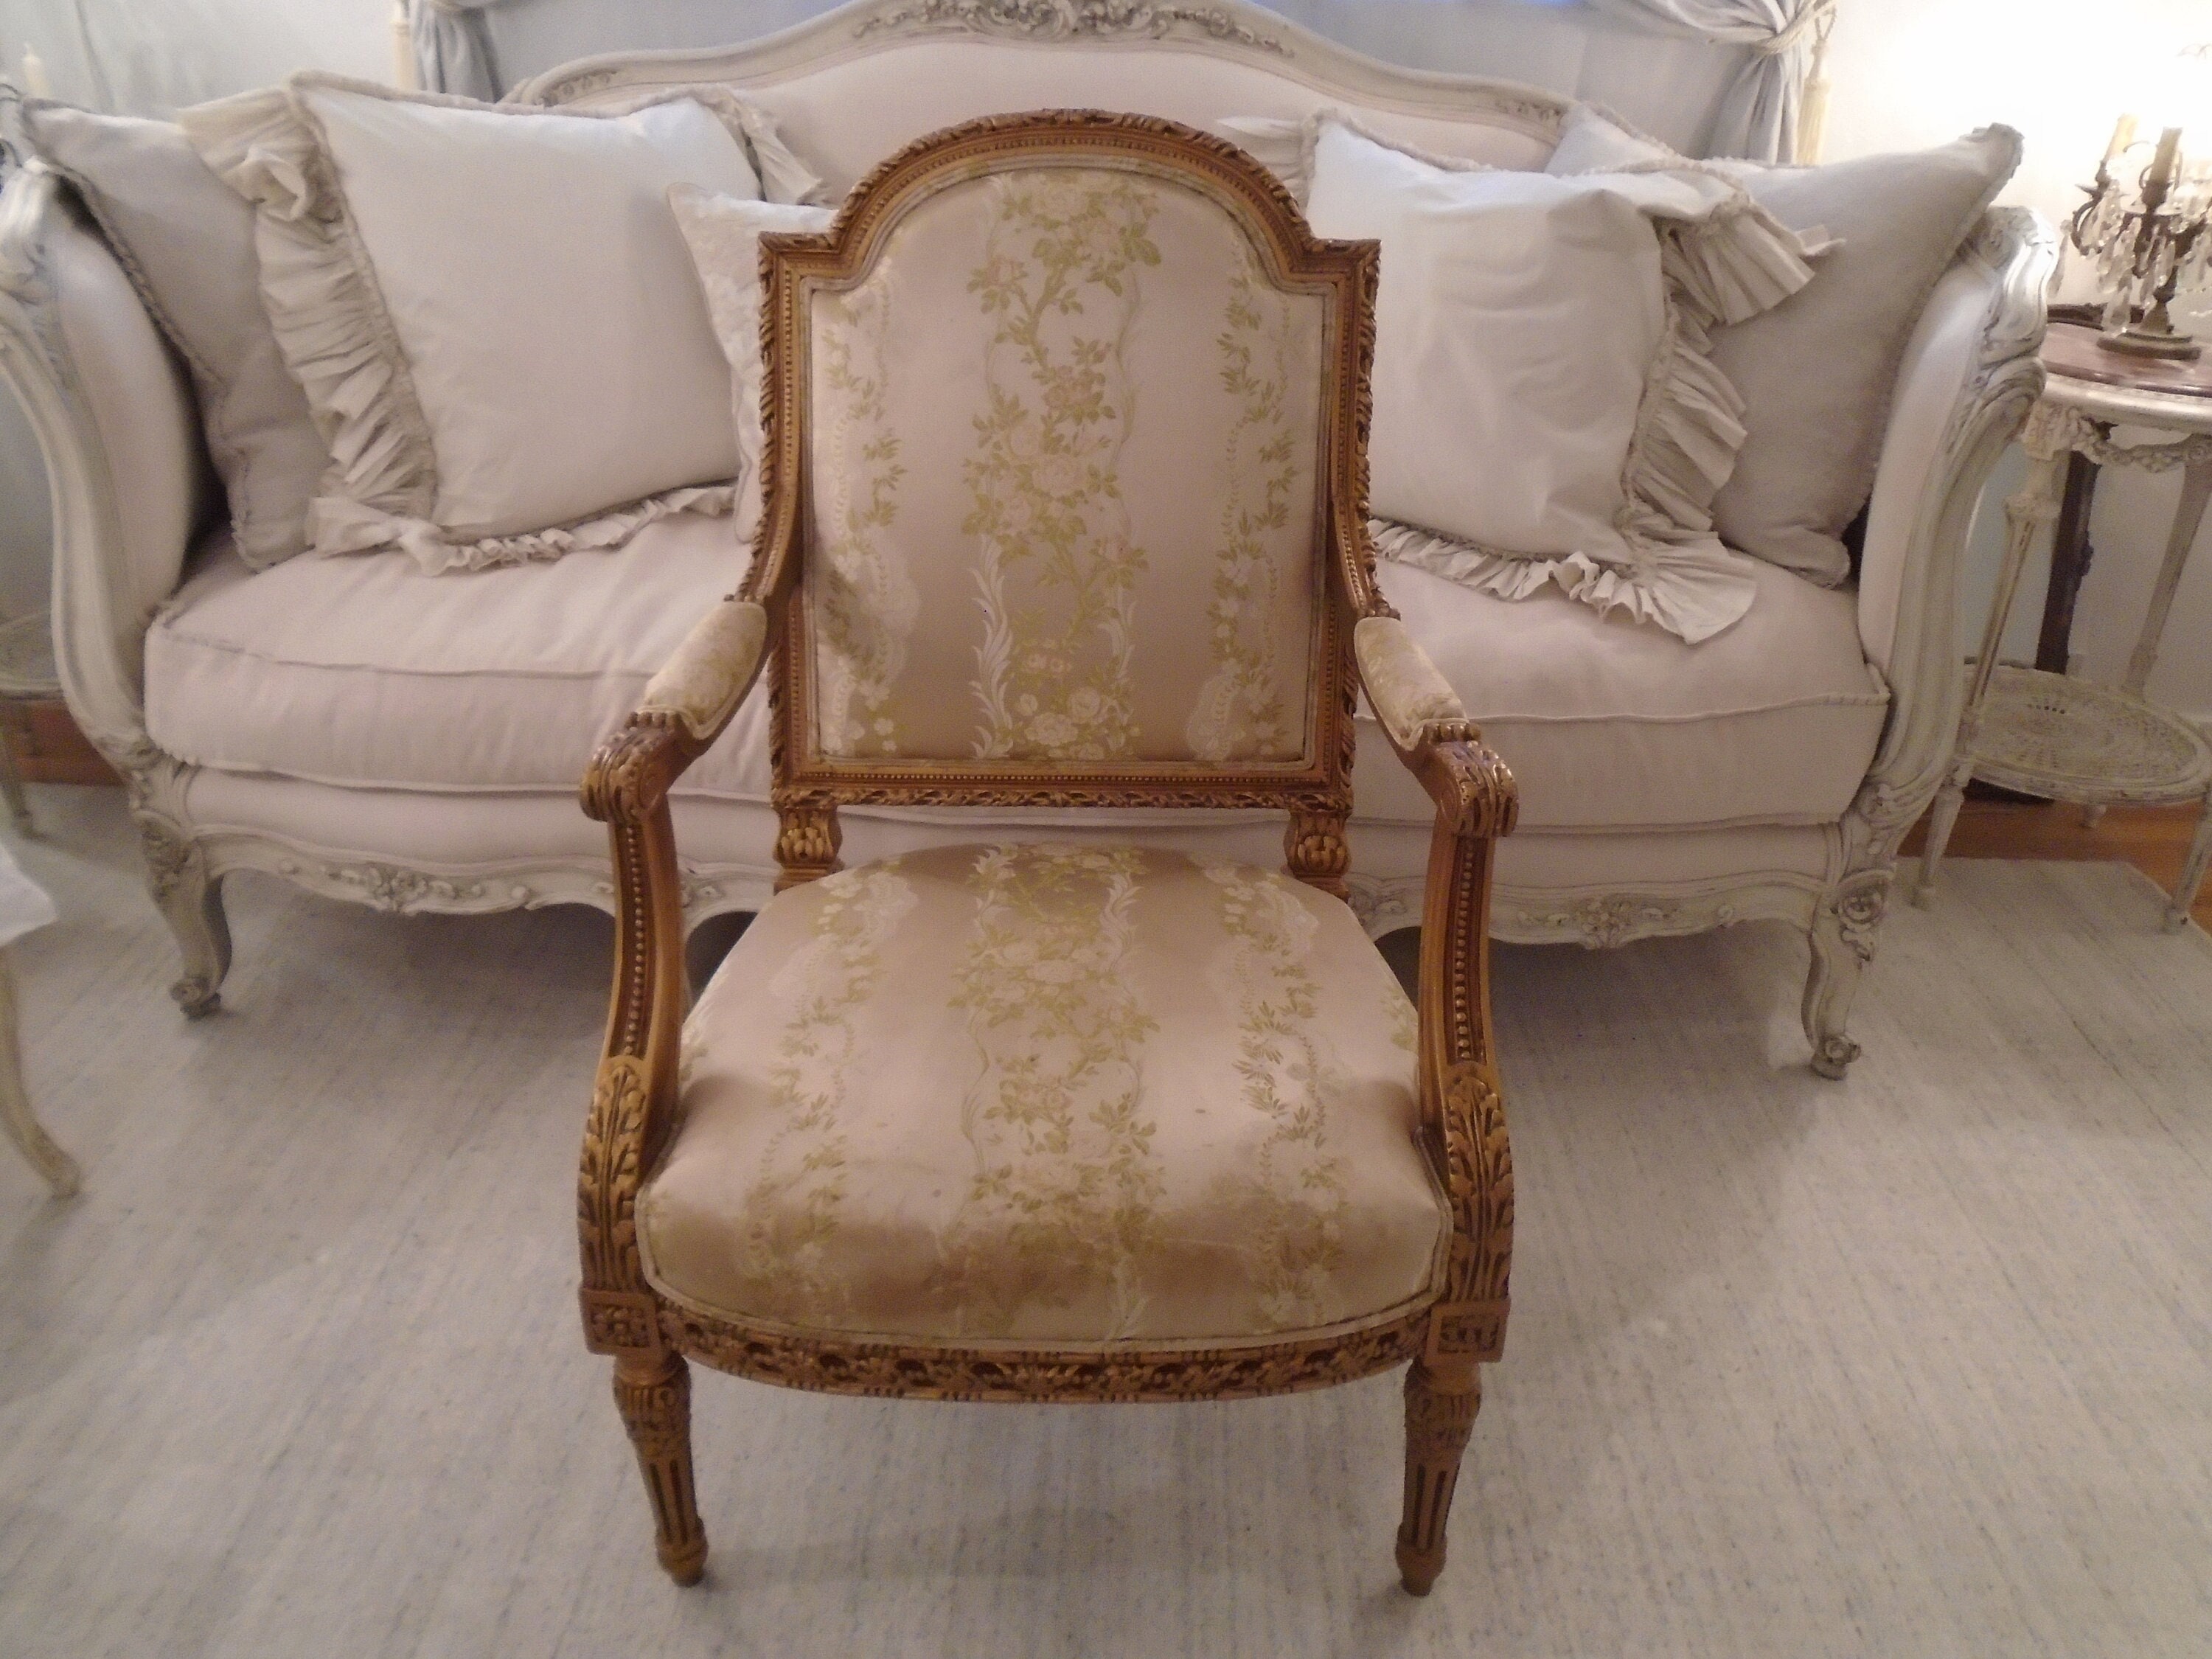 19th Century French Rococo Louis XV style handcrafted and foil gilded  Elegant Loveseat Settee